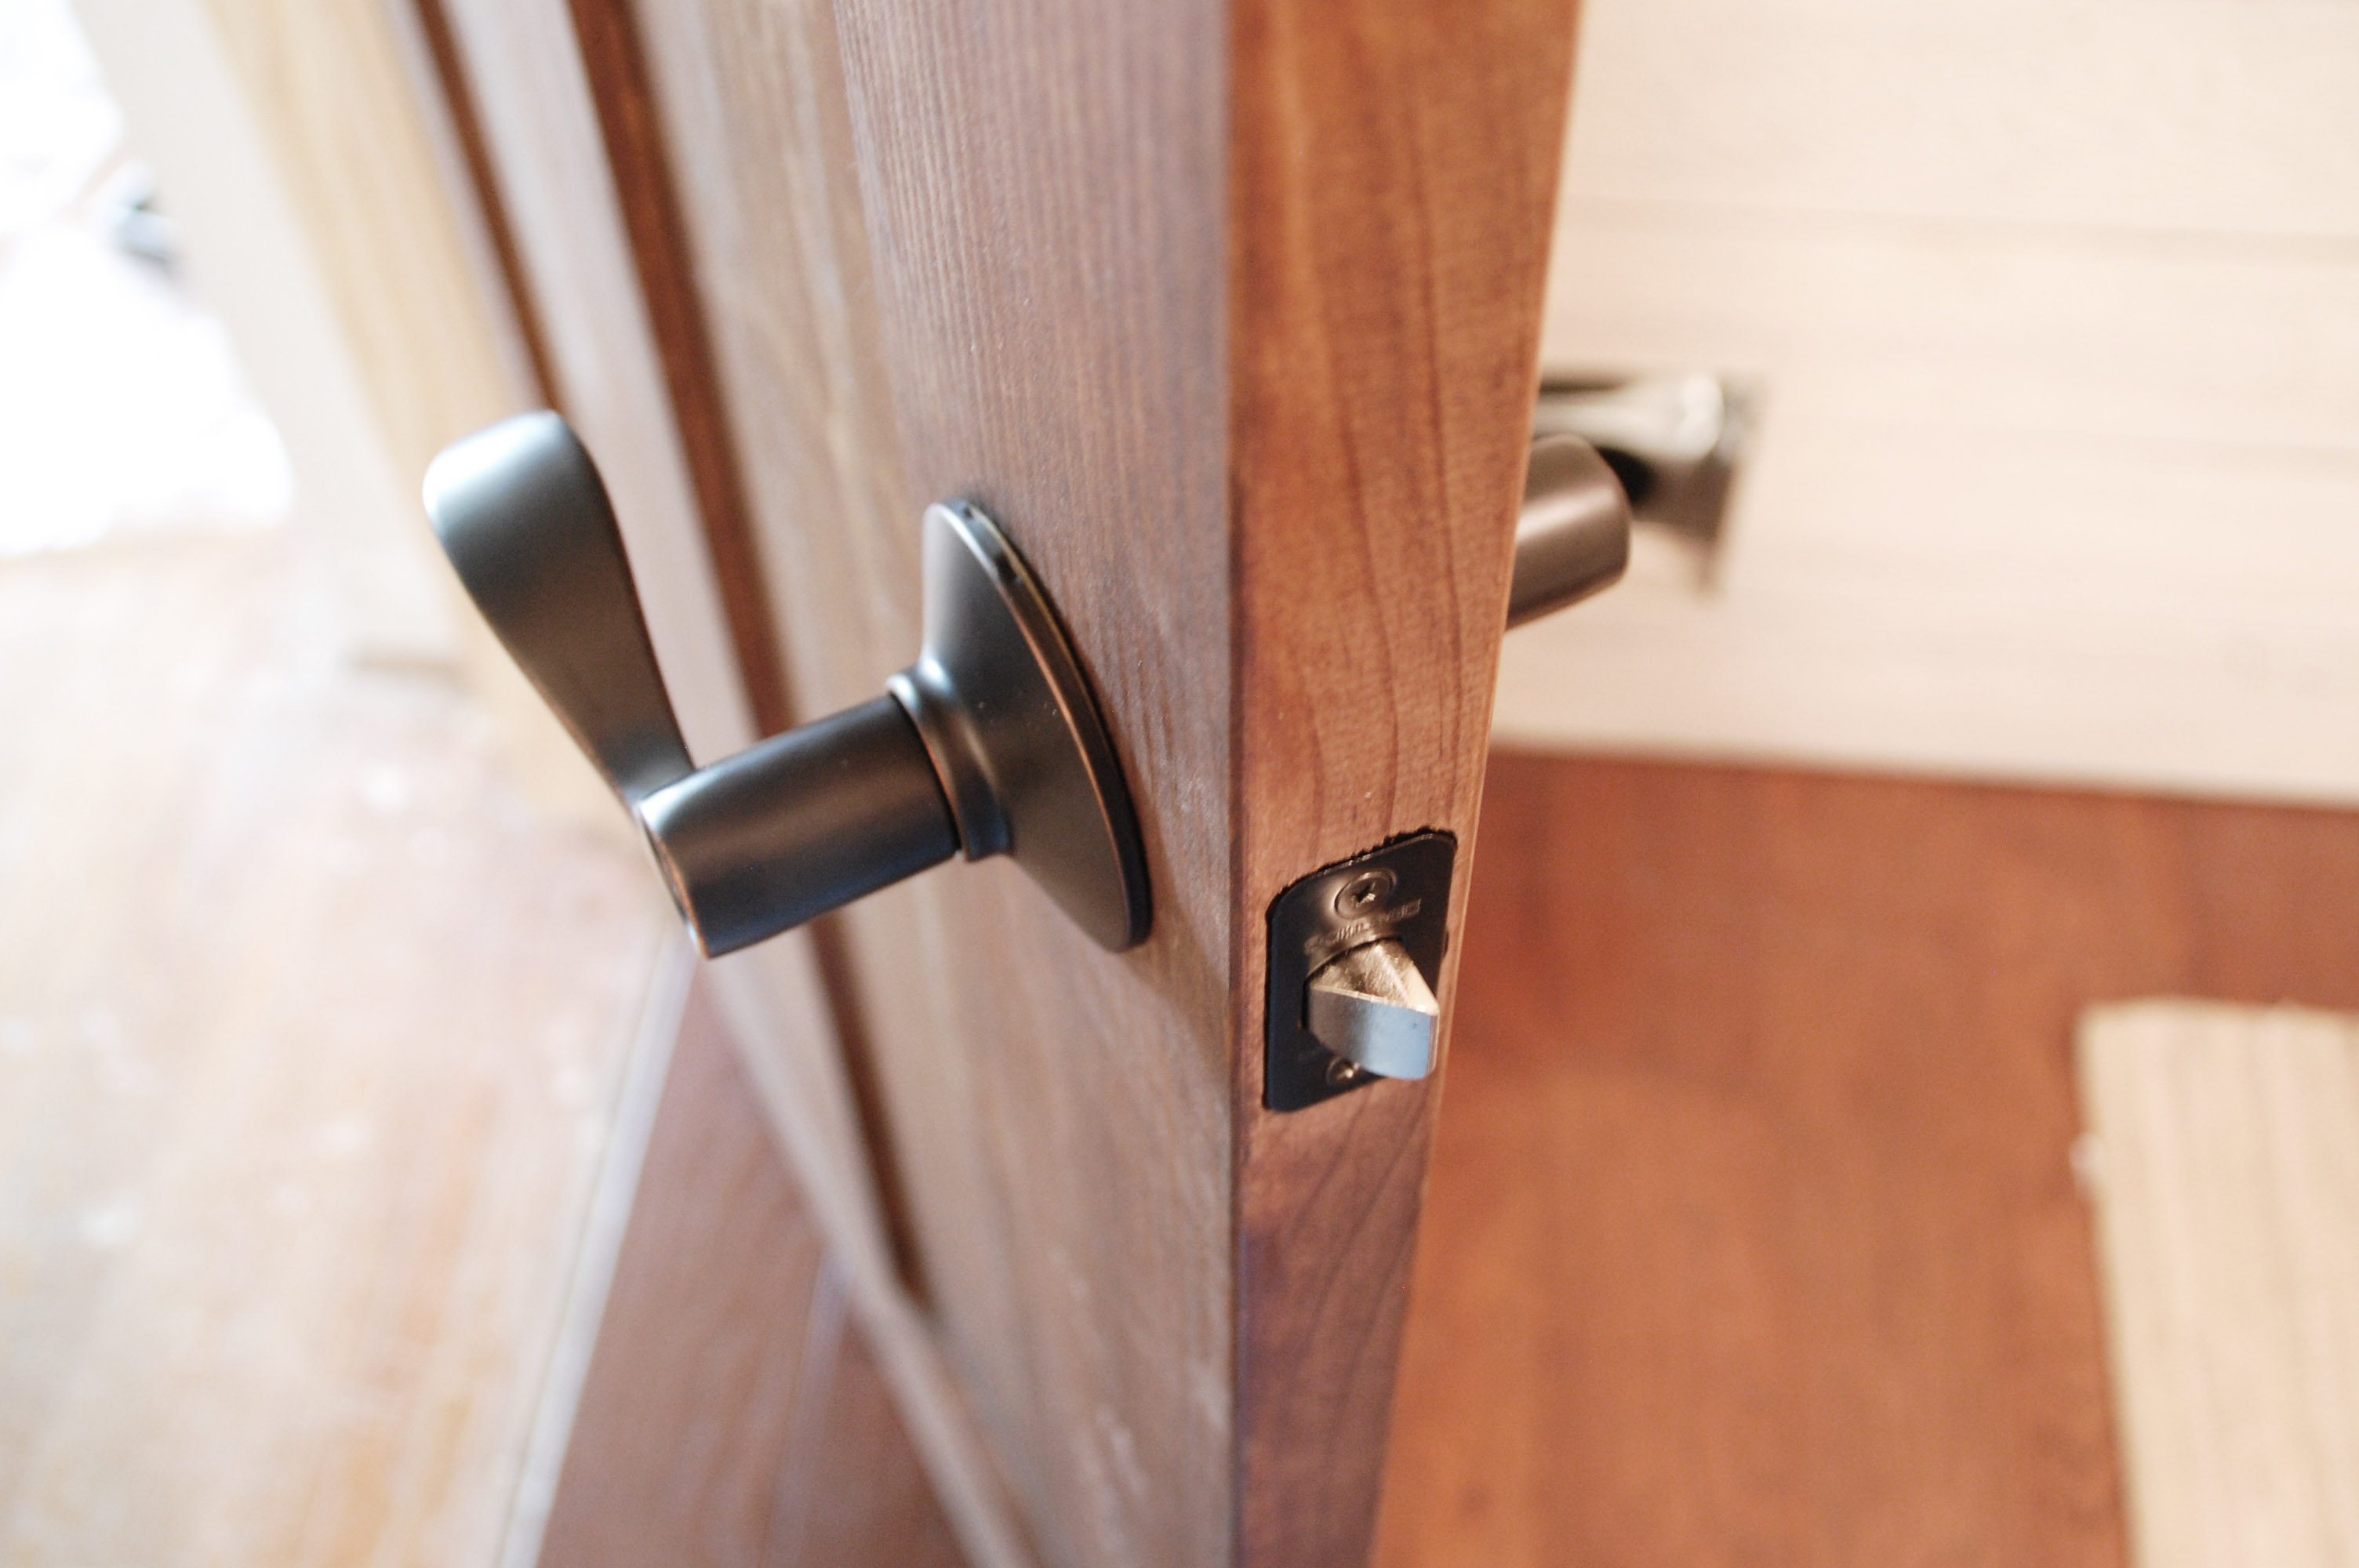 How to Install Door Hardware - Face Plate